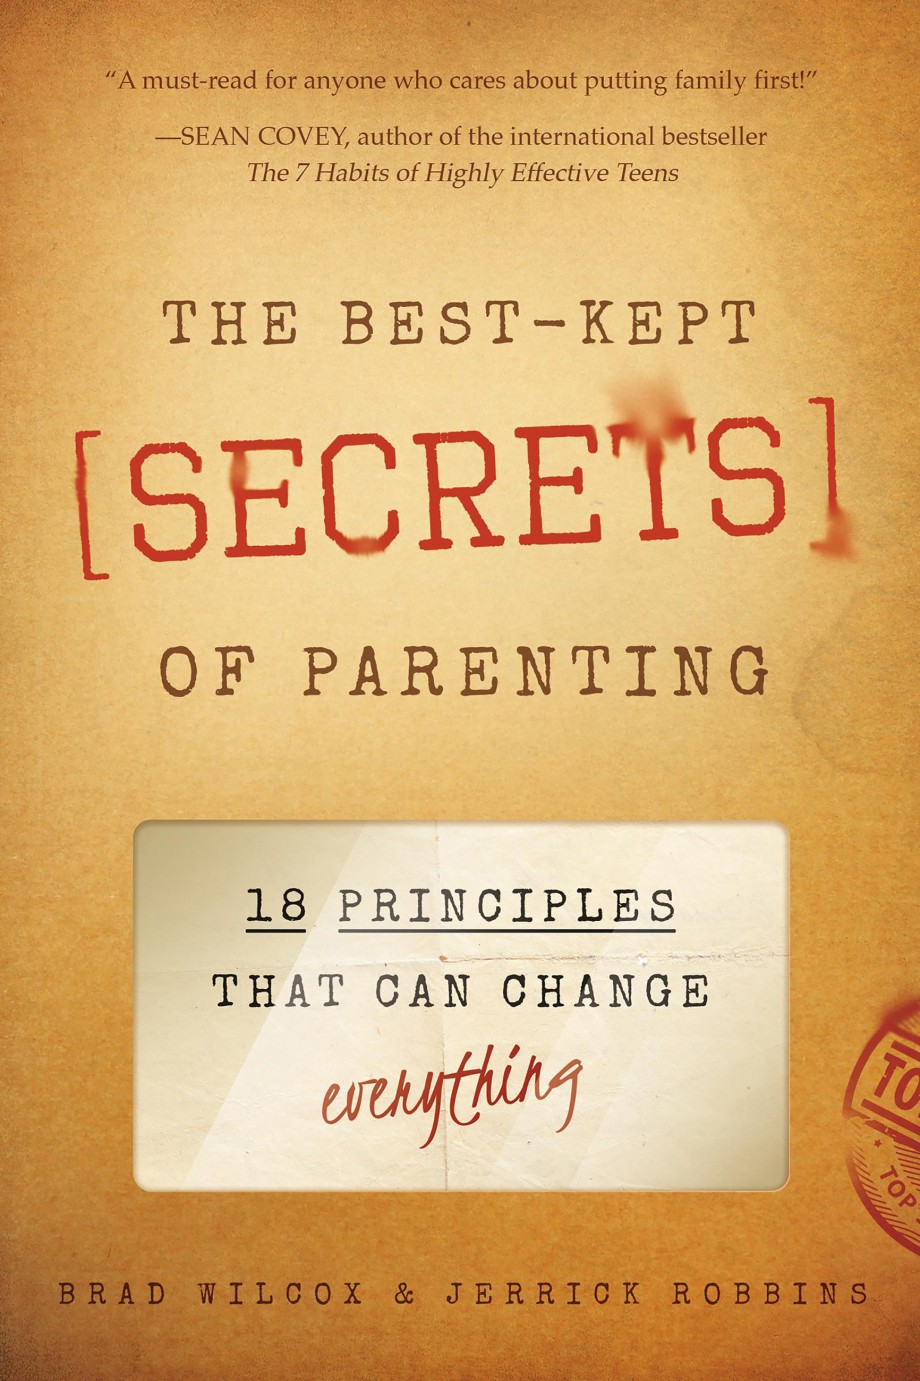 Best-Kept Secrets of Parenting 18 Principles that Can Change Everything